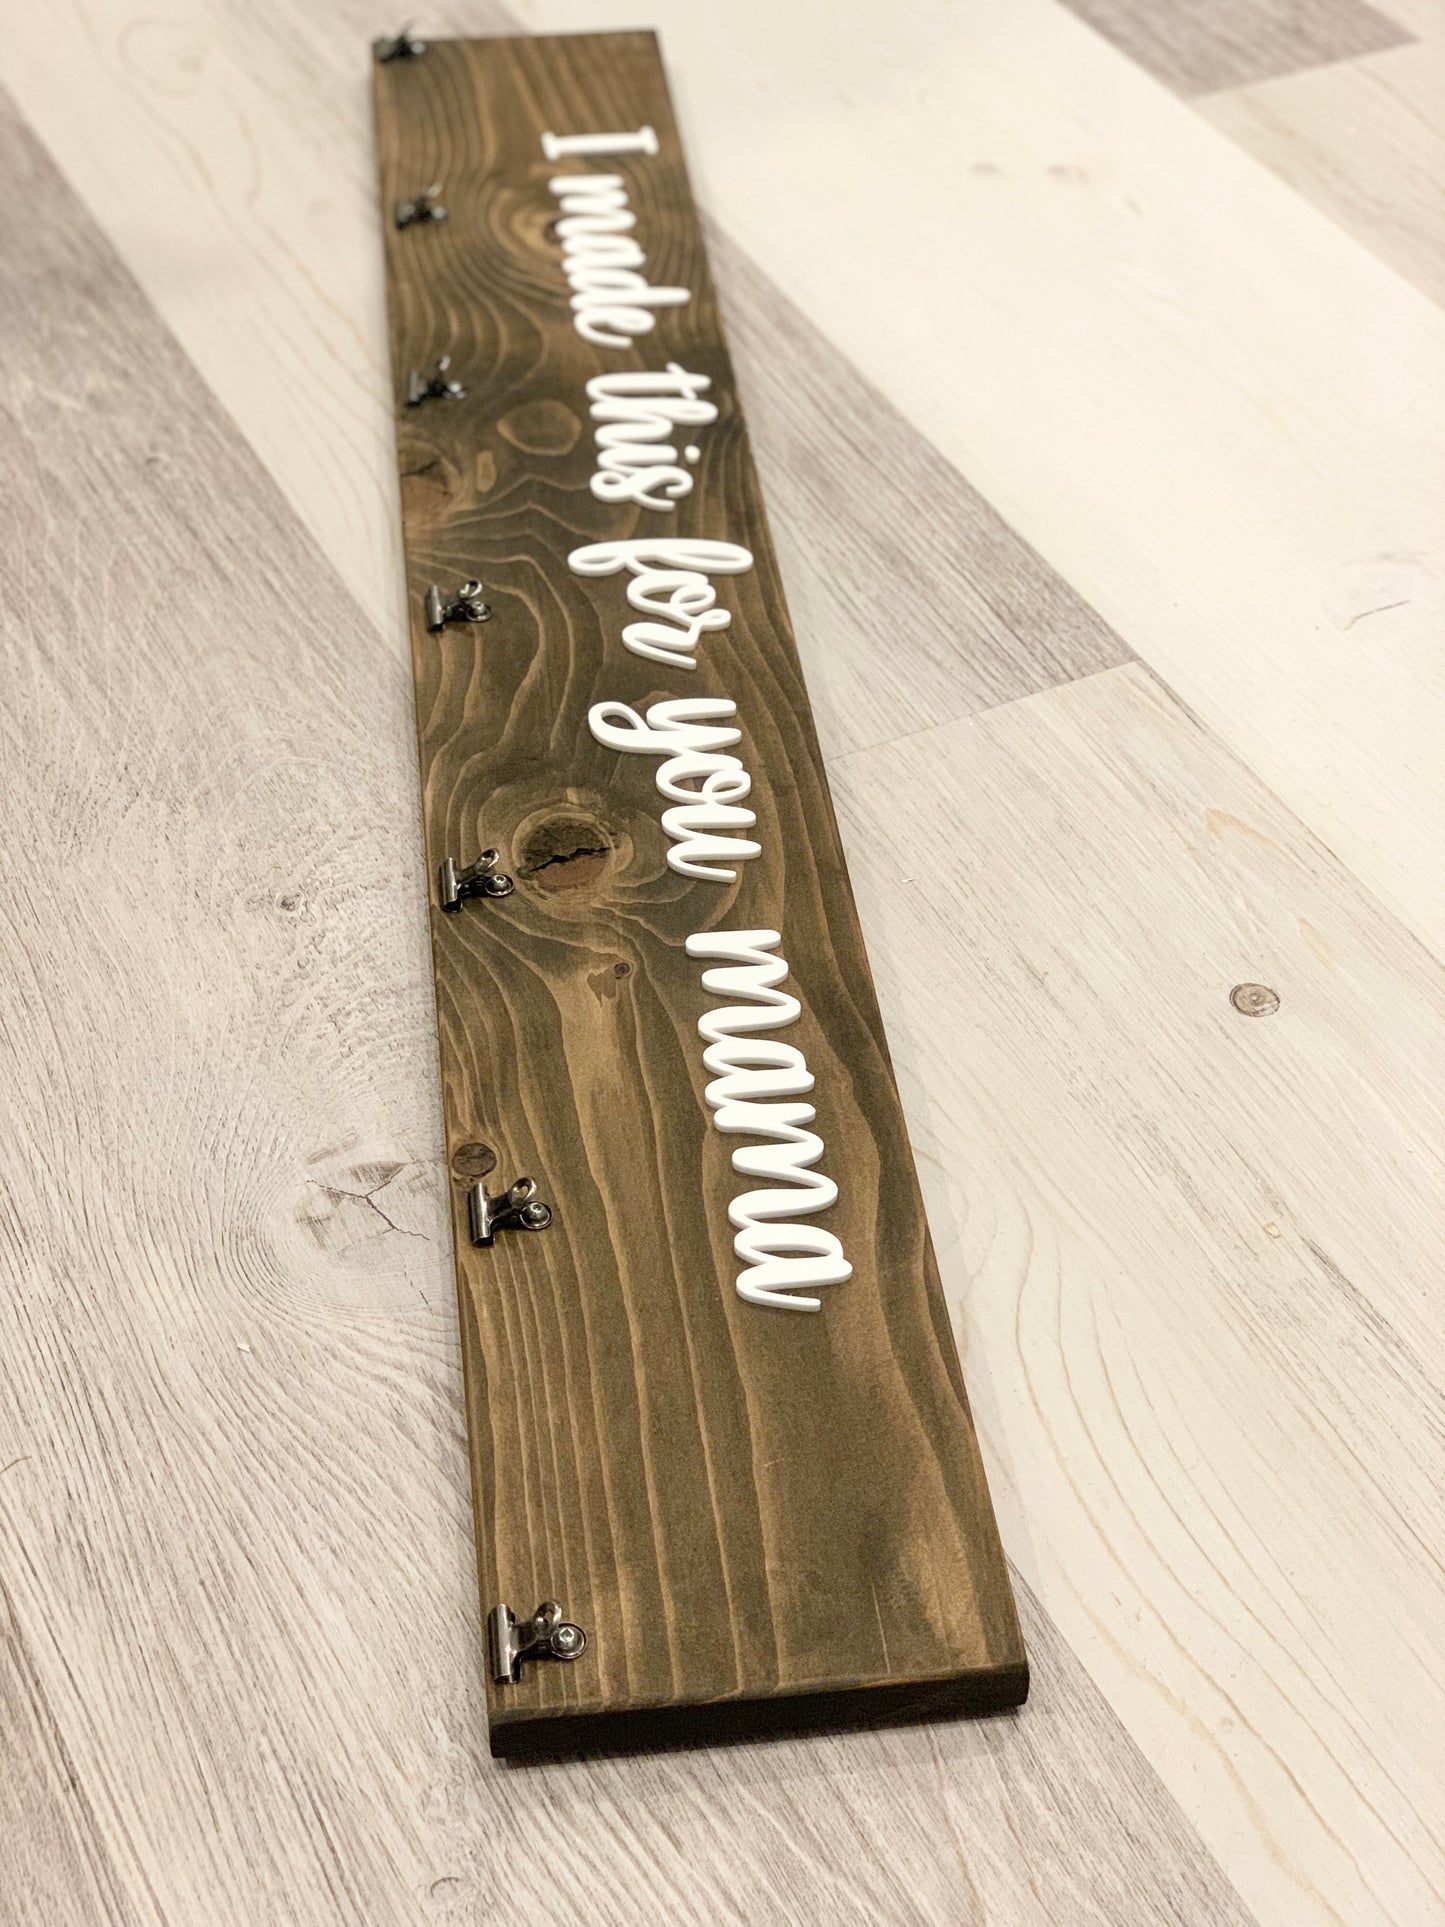 “I made this for you mama” wood sign to display children’s artwork